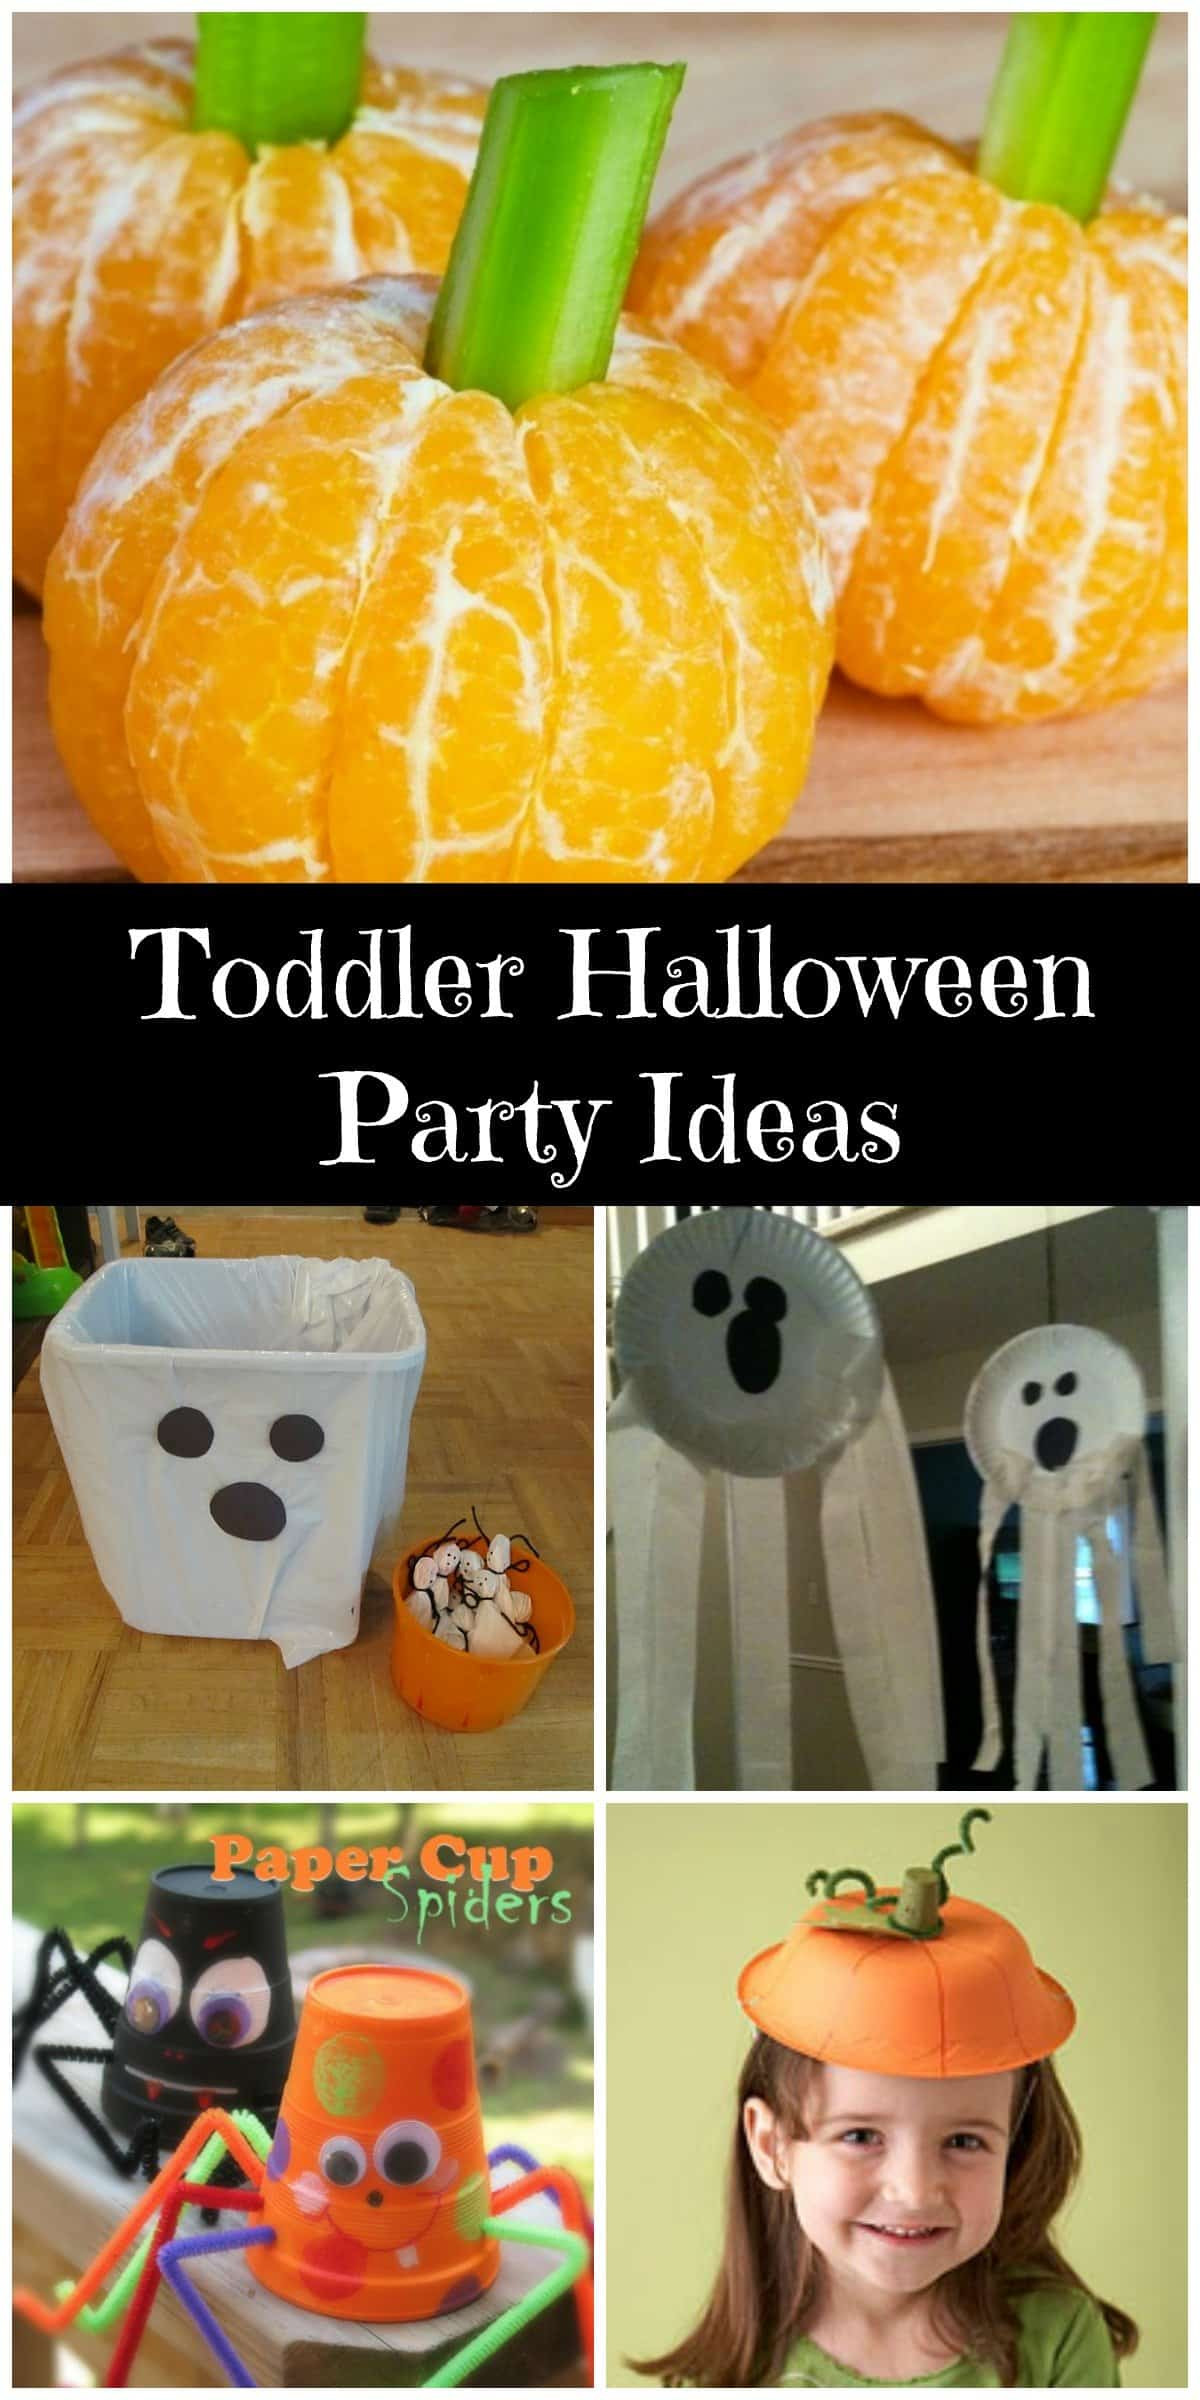 Childrens Halloween Birthday Party Ideas
 Toddler Halloween Party Creative Ramblings